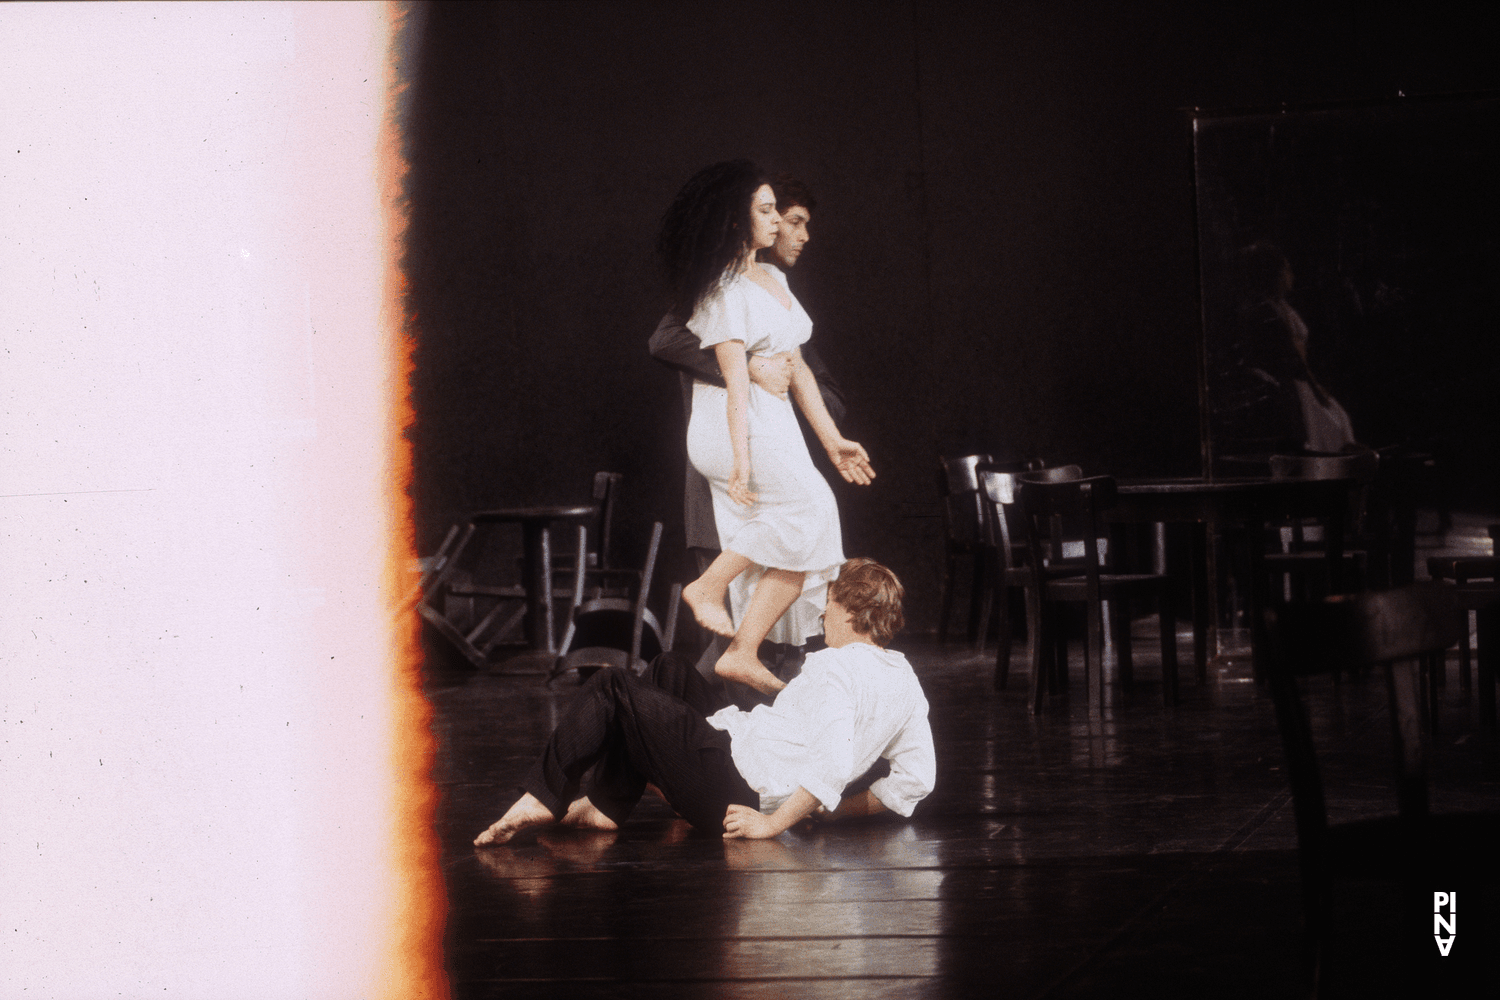 Dominique Mercy, Aida Vainieri and Fabien Prioville in “Café Müller” by Pina Bausch